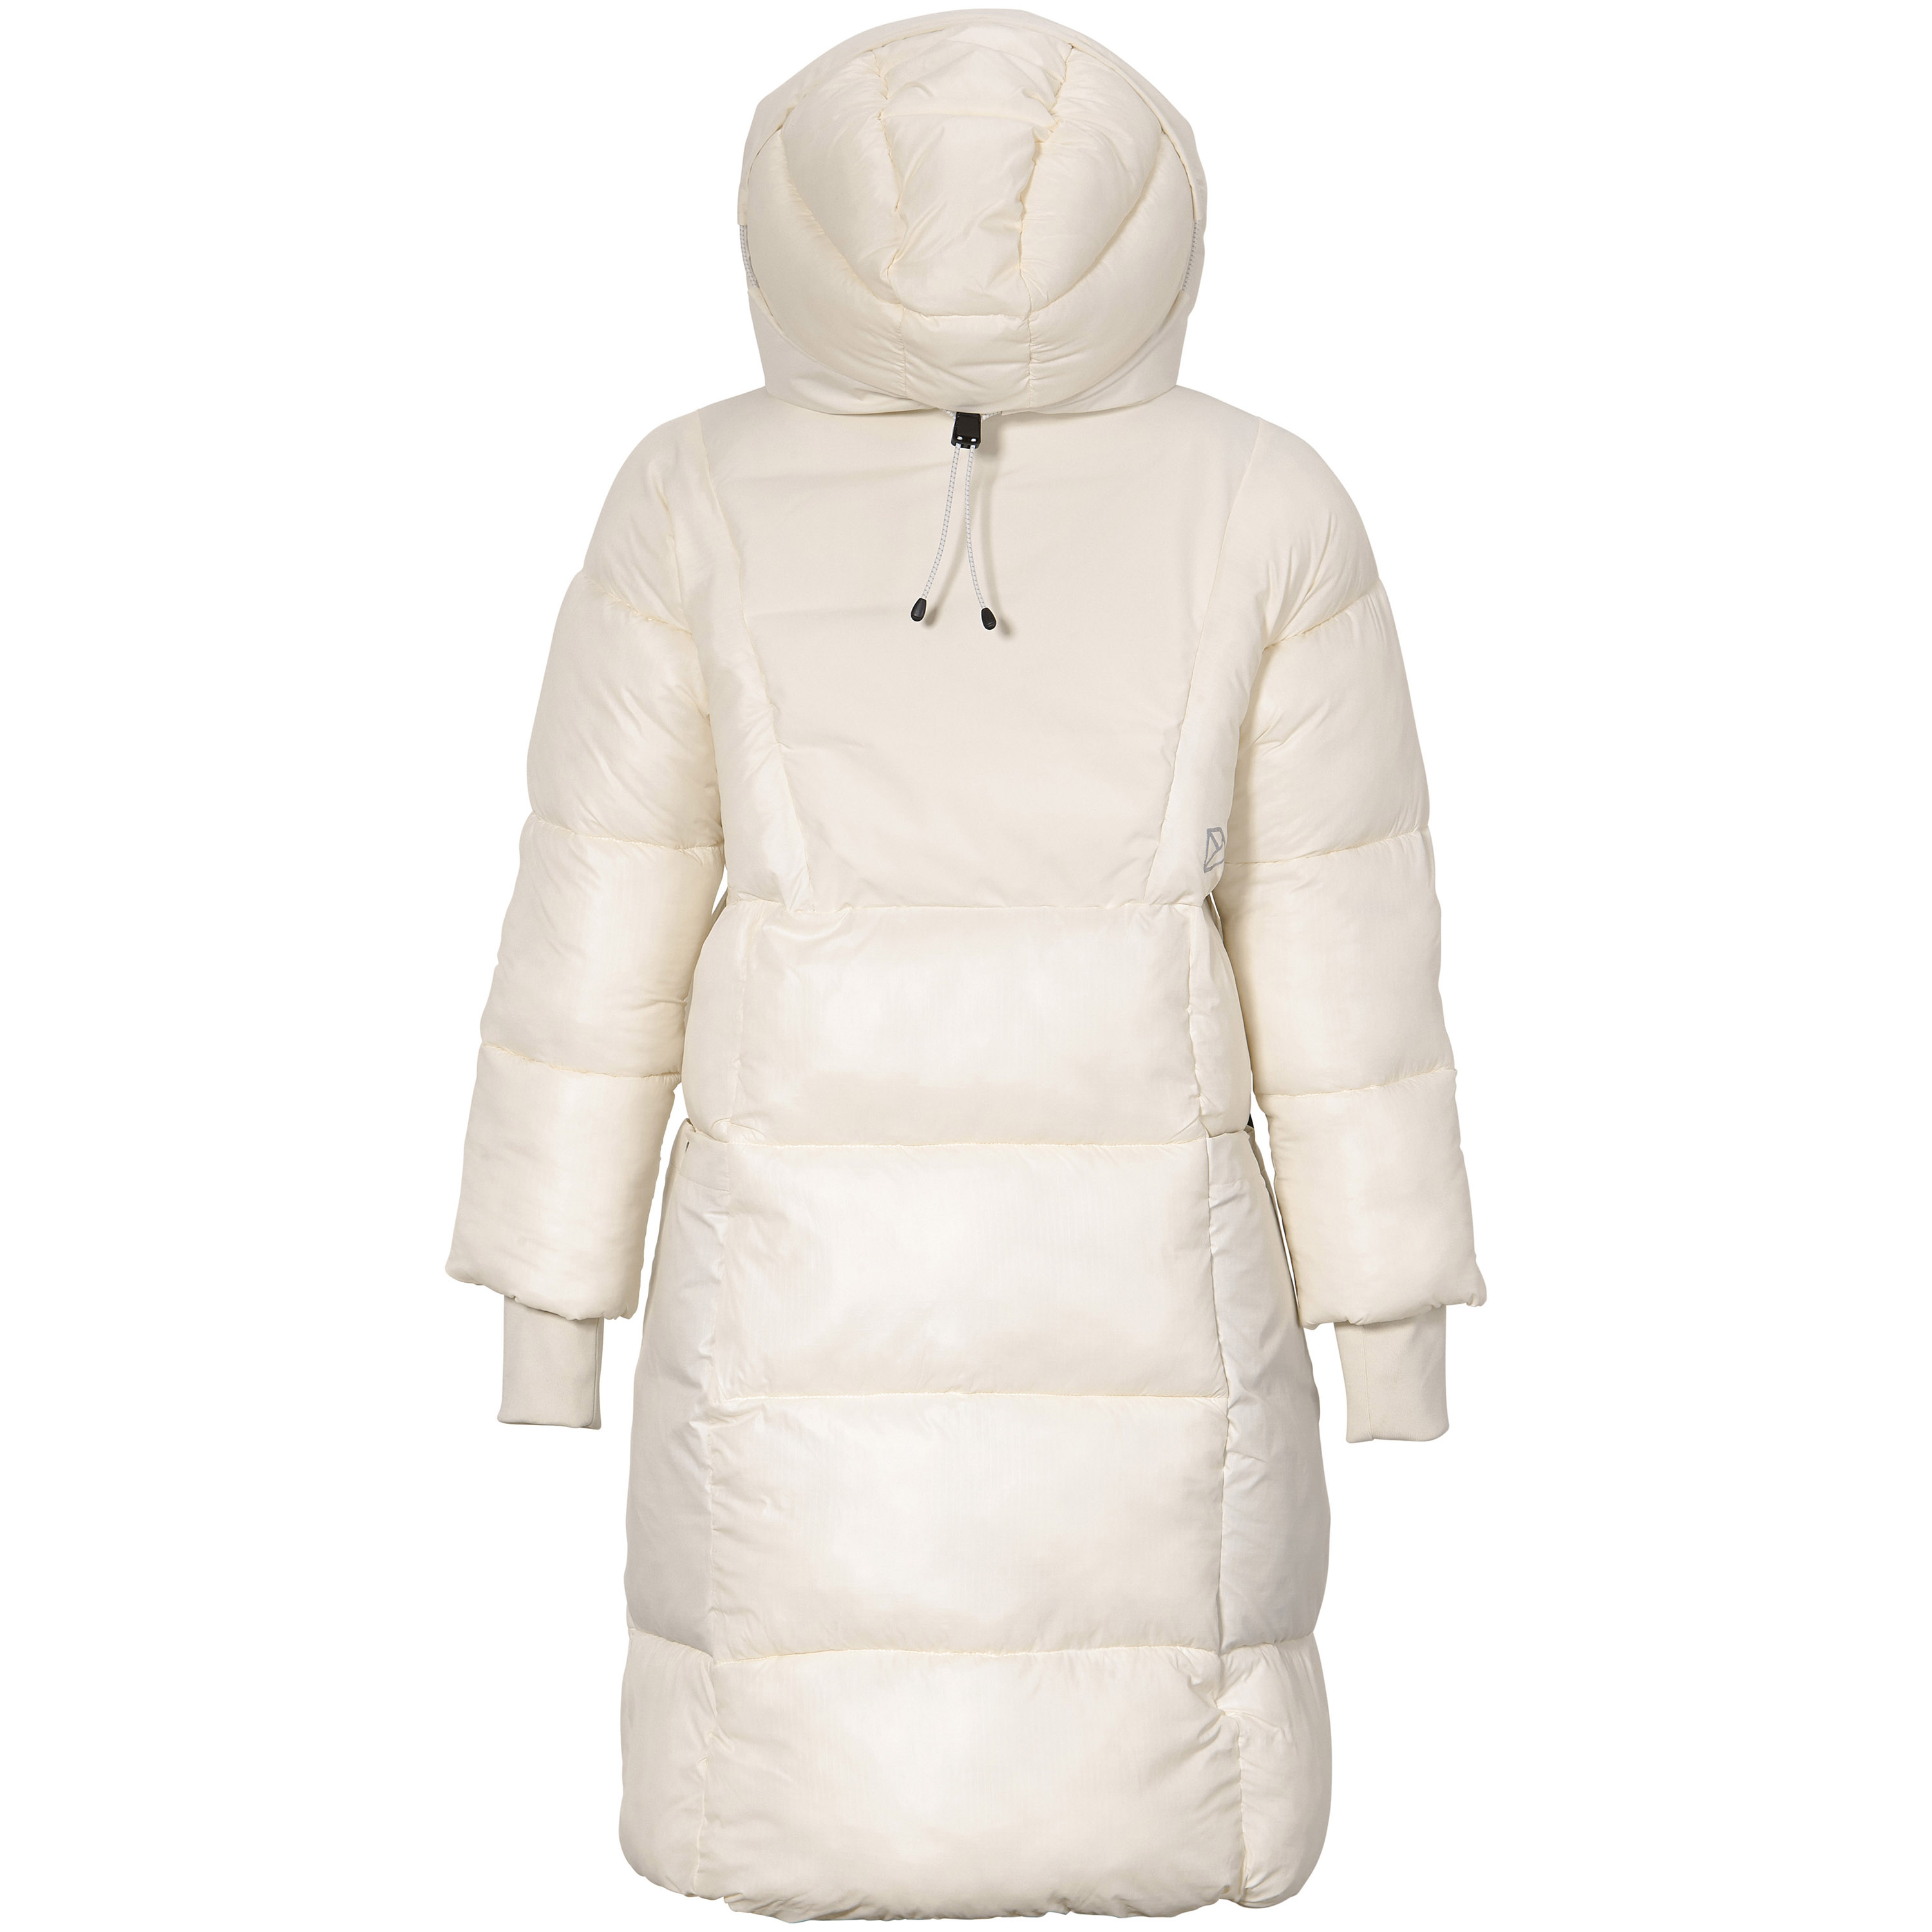 Buy Didriksons Andrea Women's Parka Cloud White here | Outnorth